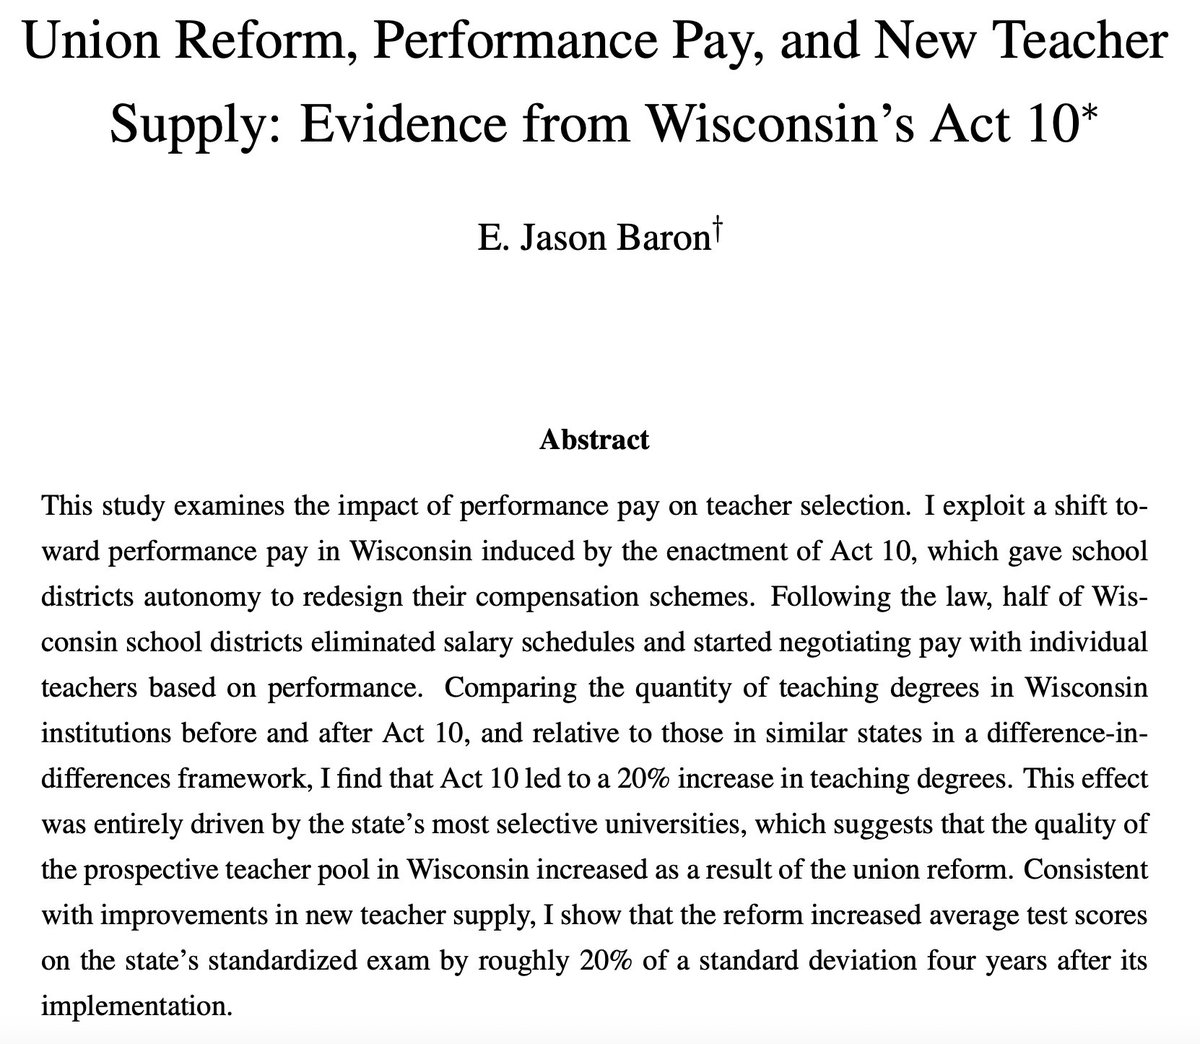 In 2011, Wisconsin nuked the ability of teachers unions' to negotiate compensation & opened the door to individual pay This incentivized large numbers of college students to enter teaching -- particularly from selective universities -- and appreciably raised K-12 achievement